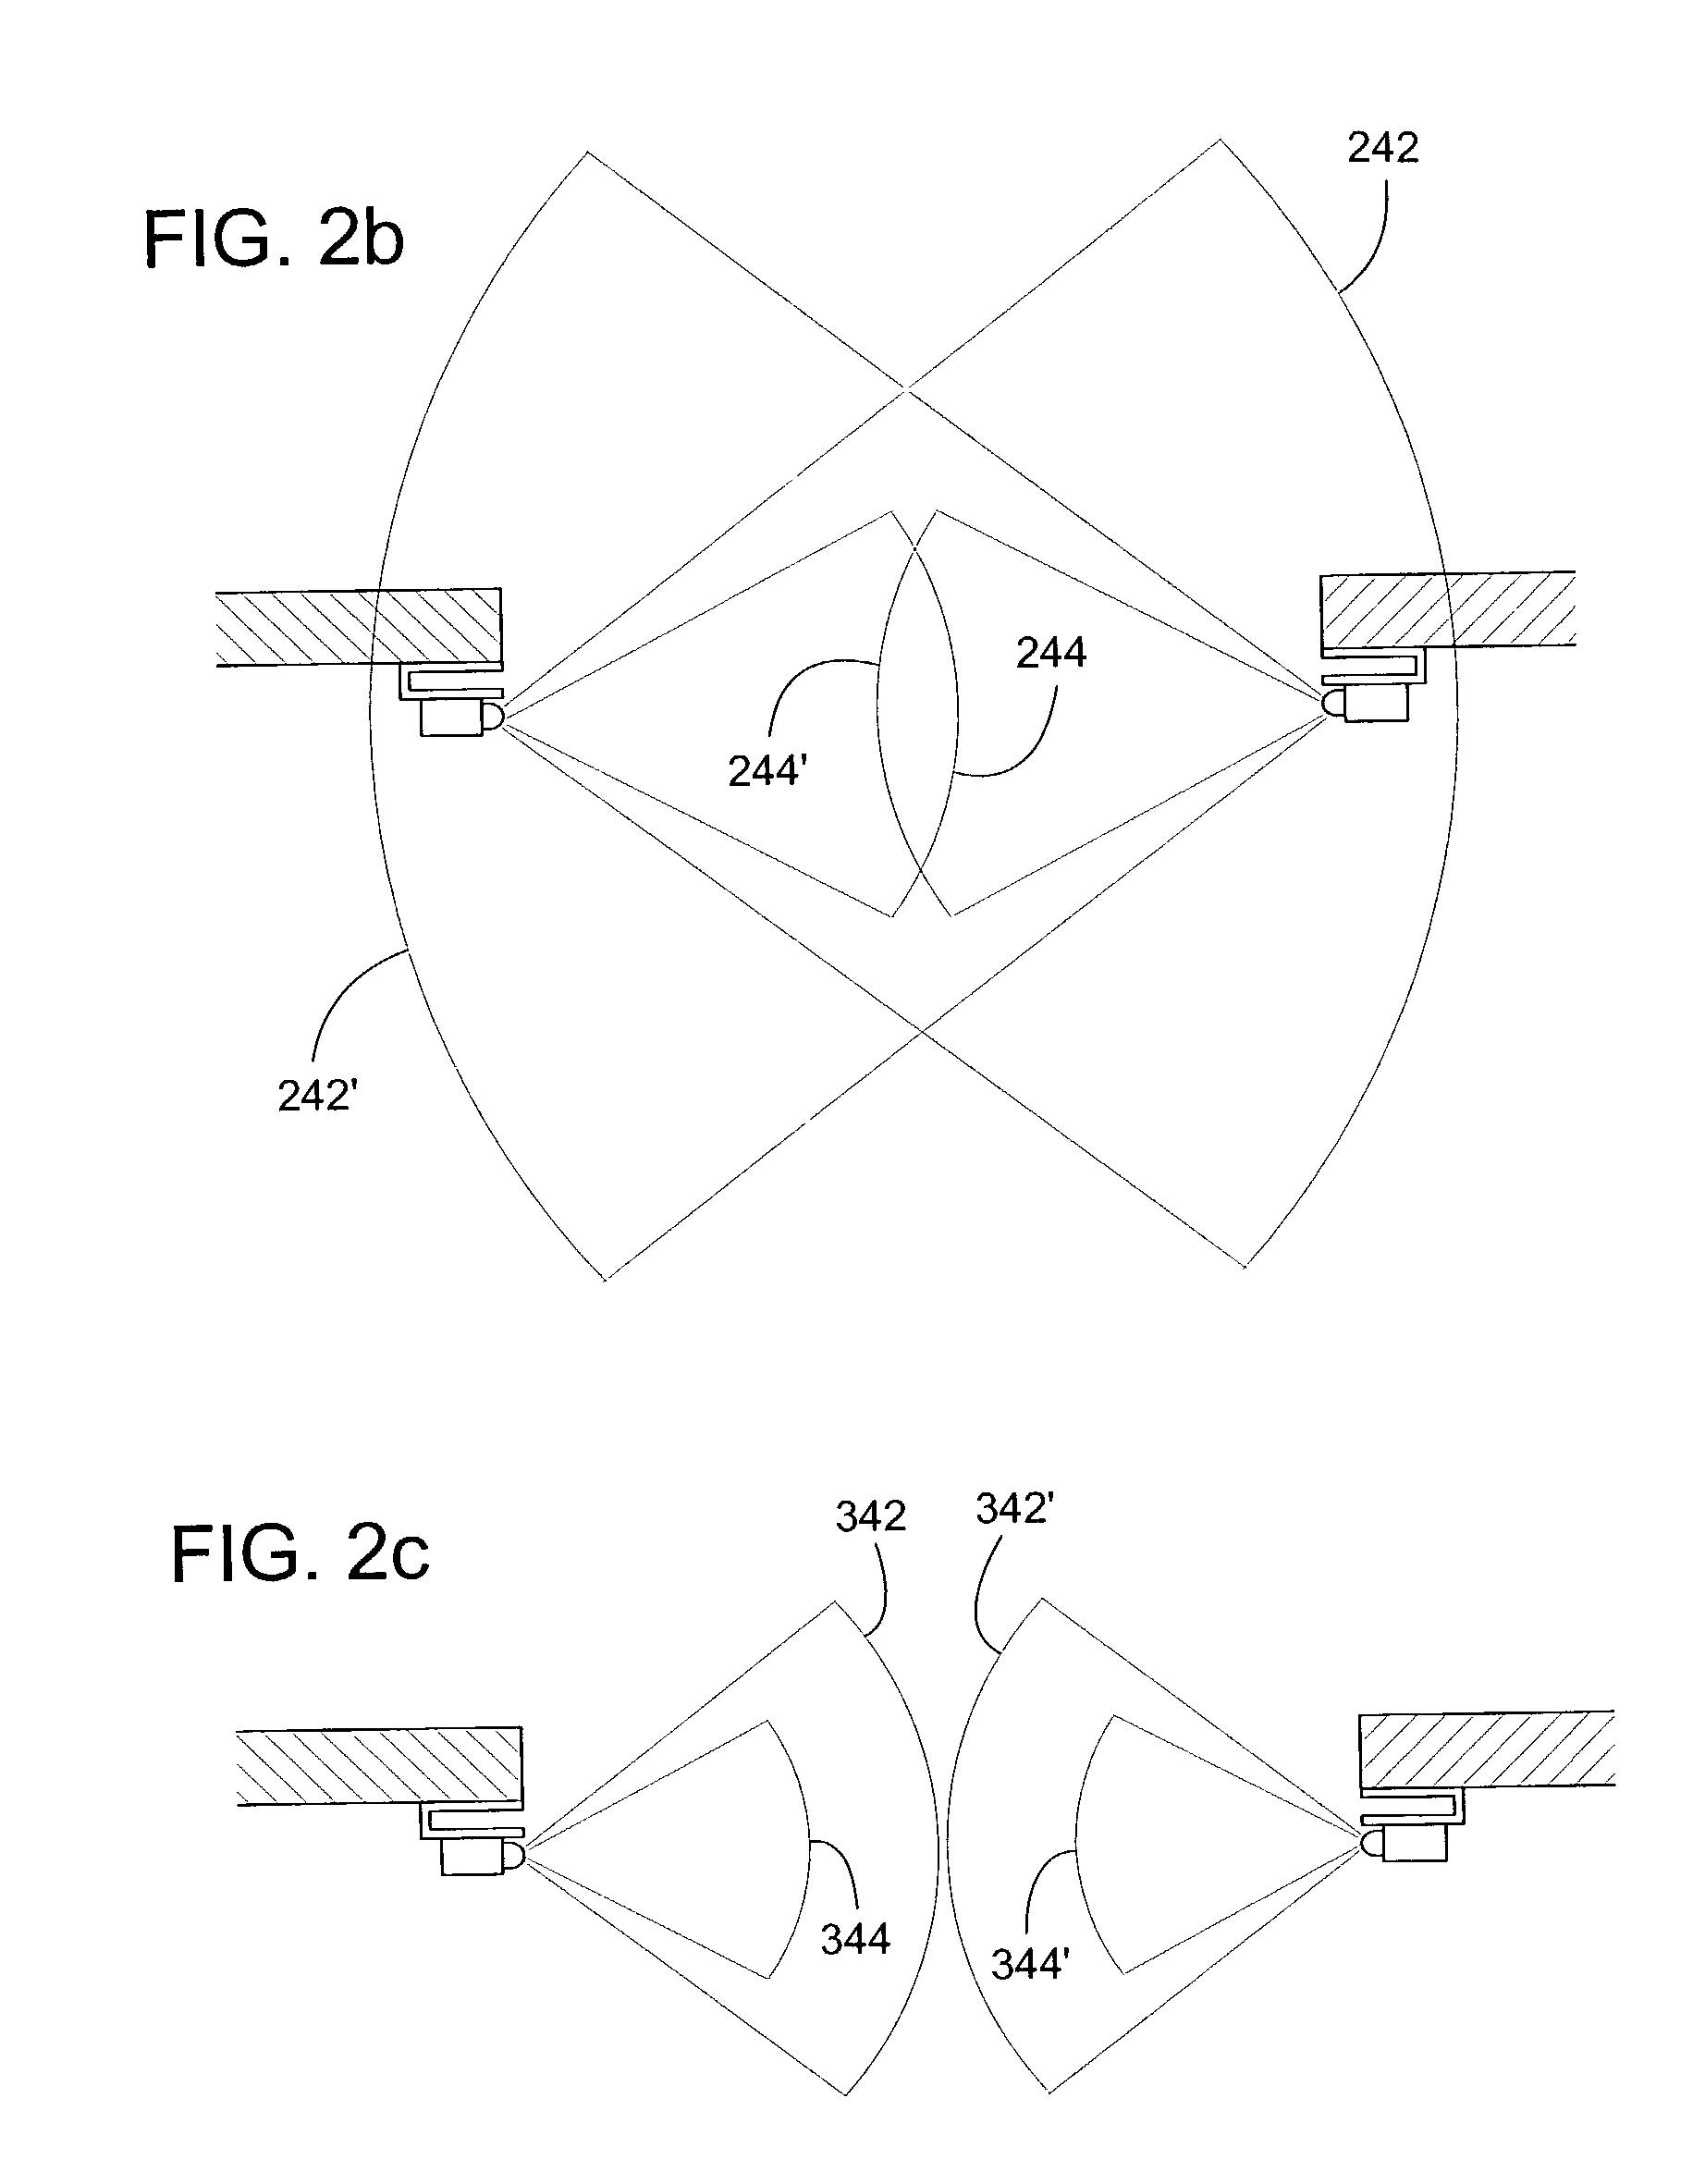 Passive detection system for detecting a body near a door